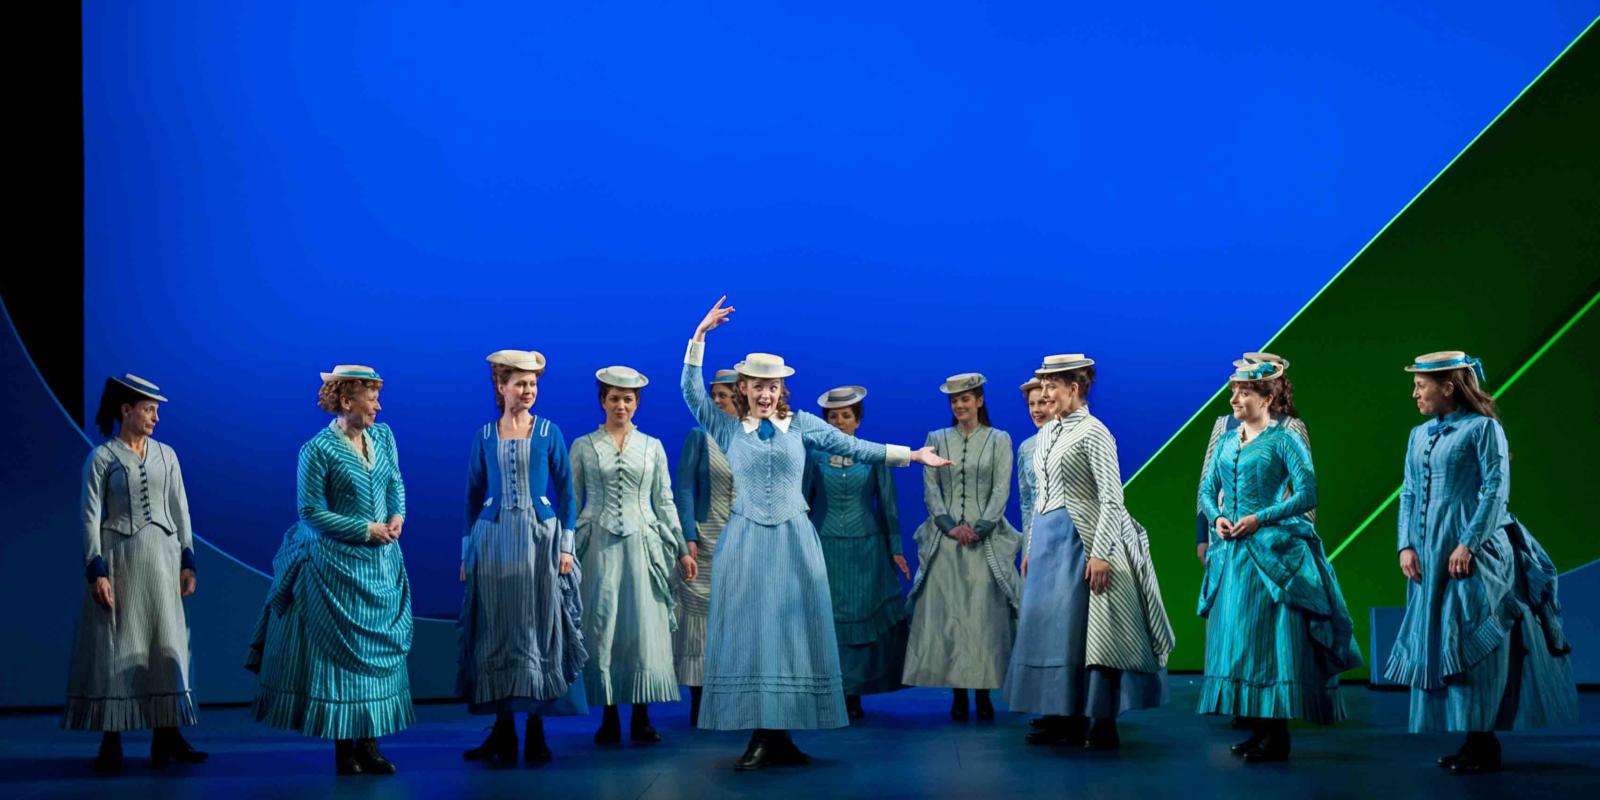 ENO's The Pirates of Penzance Angharad Lyddon and ENO Company in blue dresses